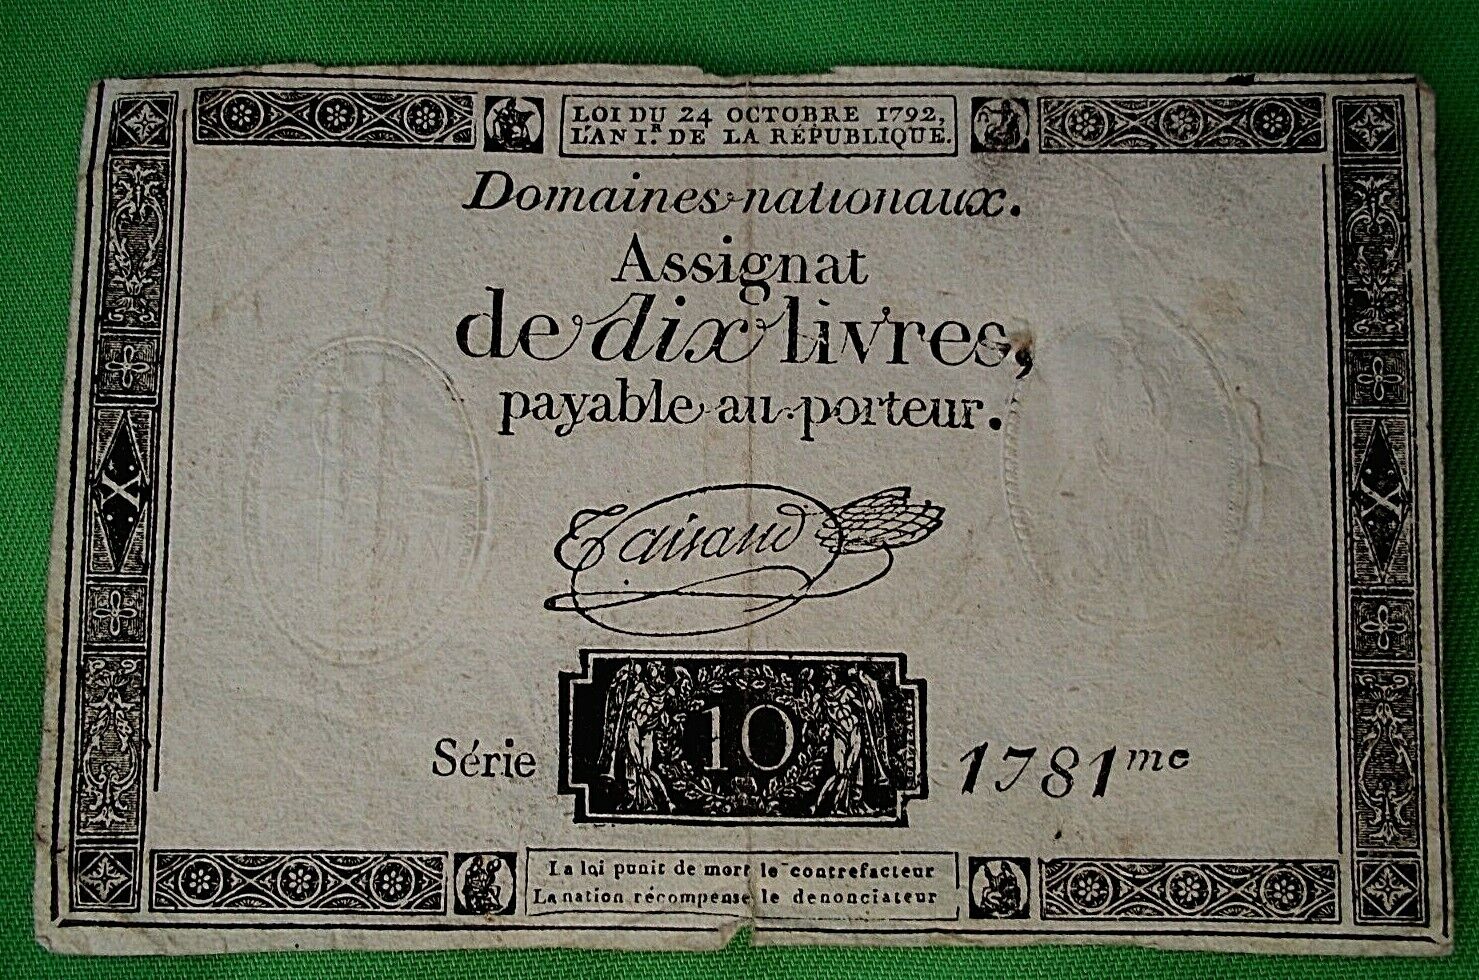 1792 EARLY FRANCE 10 LIVRES -DOMAINES Los 5 ☆ popular Angeles Mall NATIO BANKNOTE ASSIGNATS